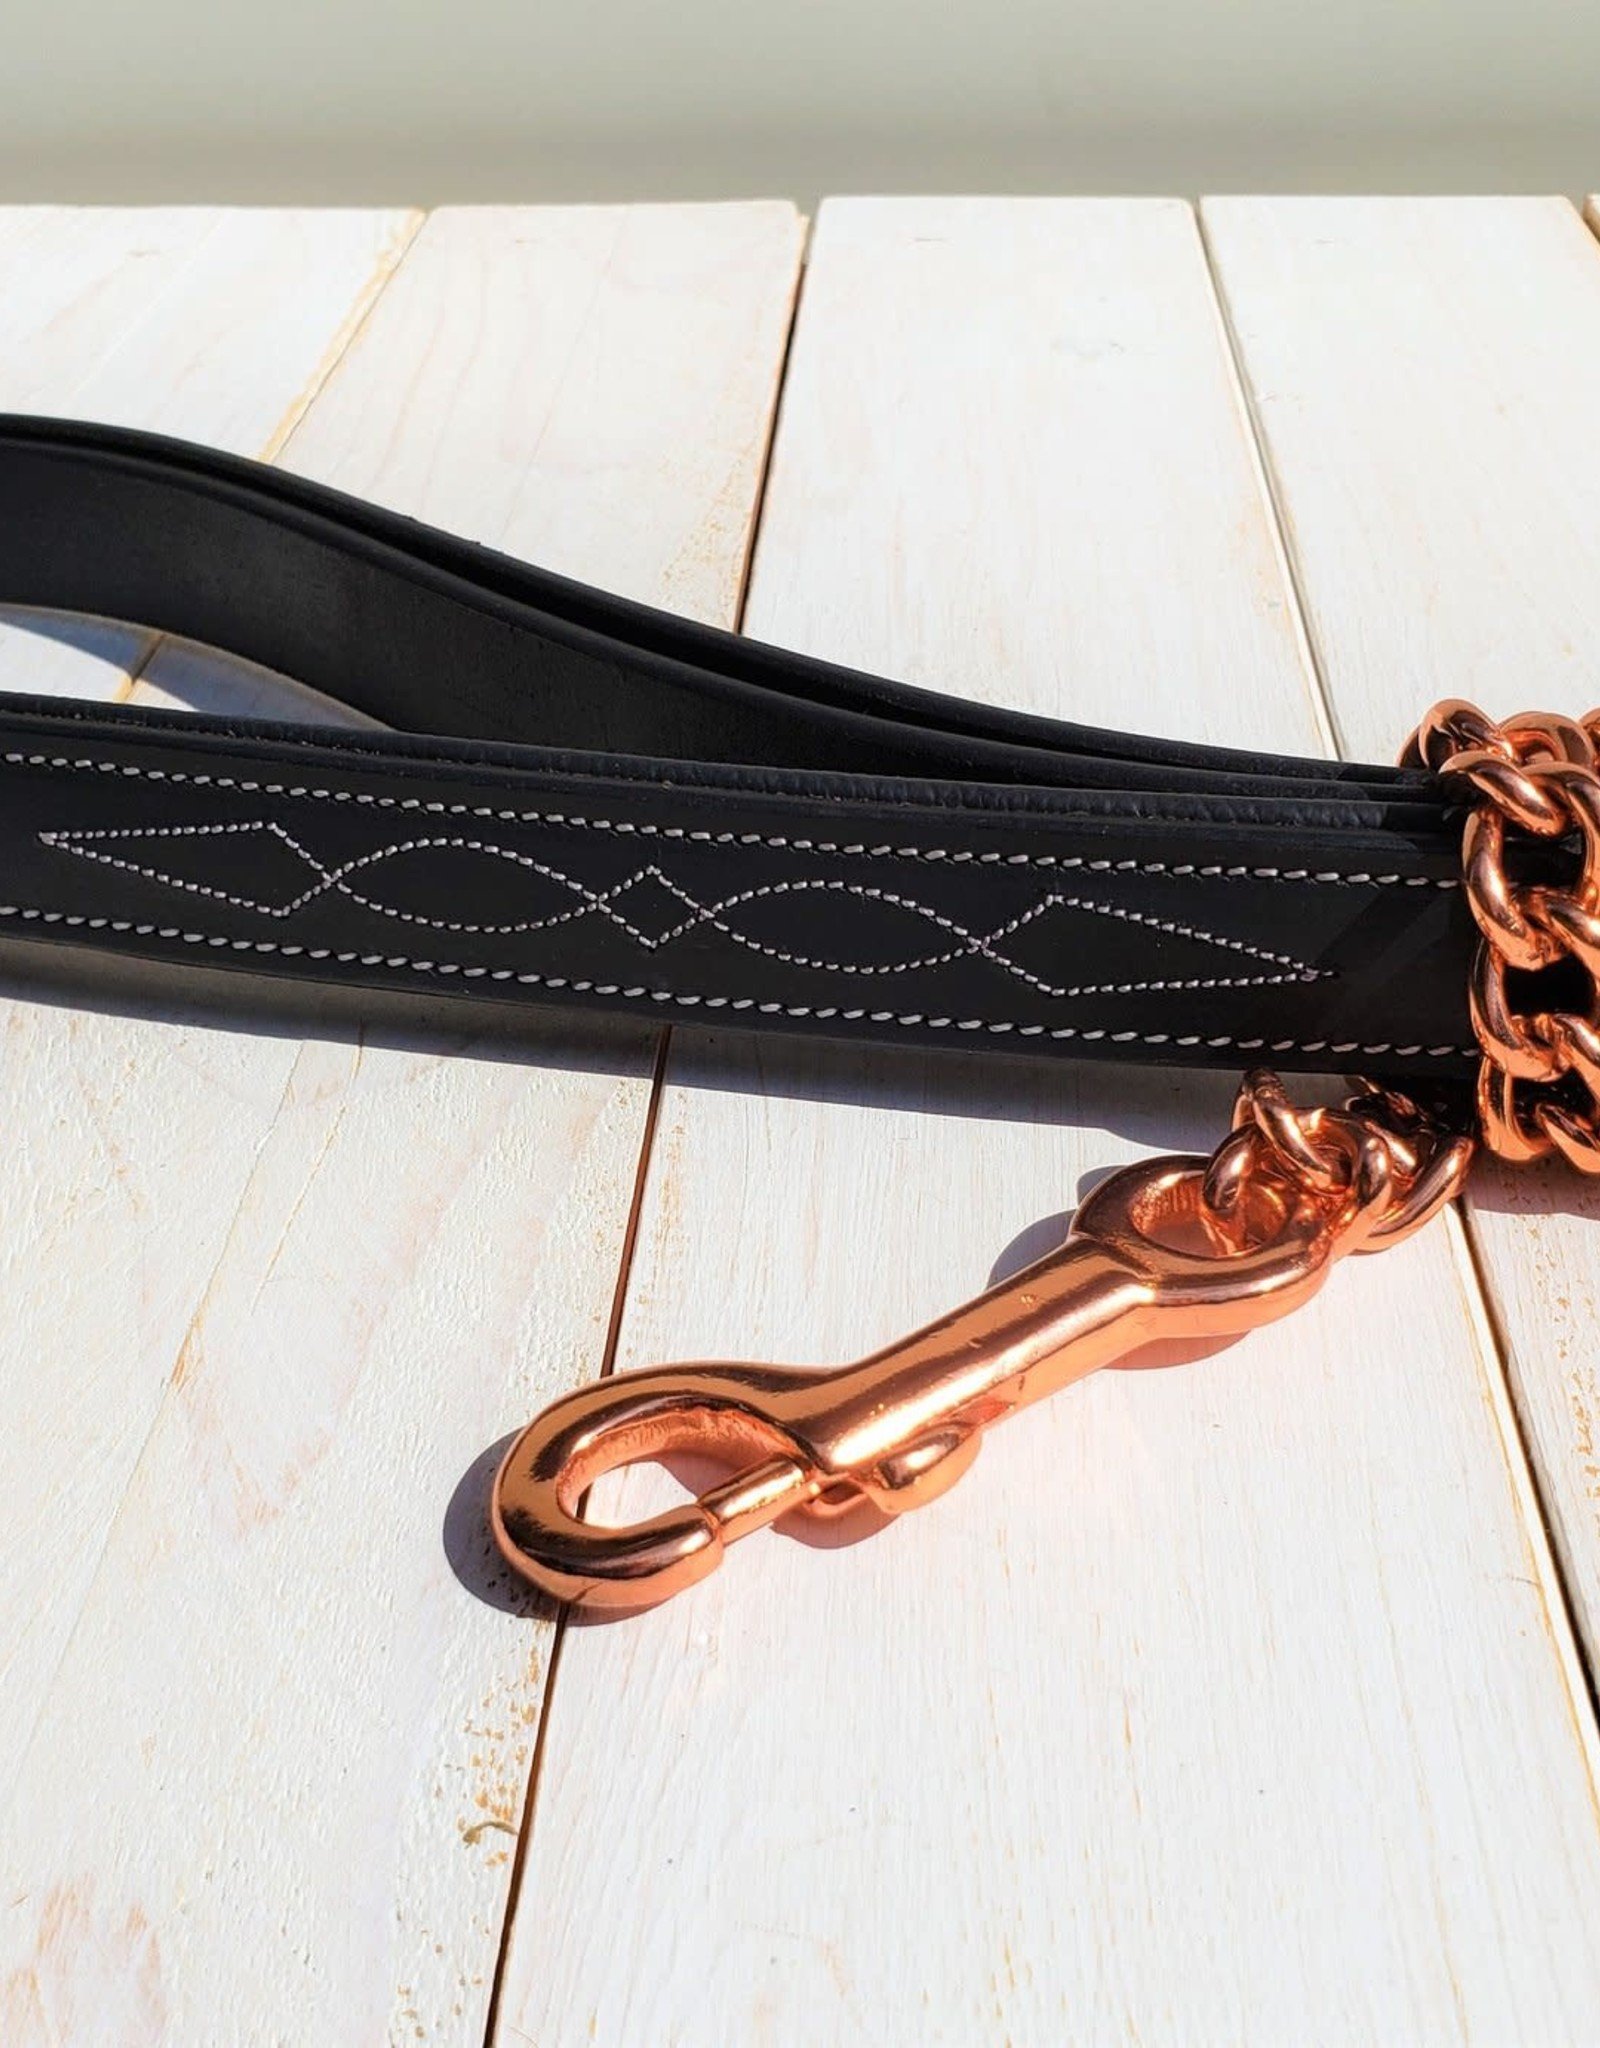 PUP & PONY CO BELMONT COLLECTION LEAD SHANK